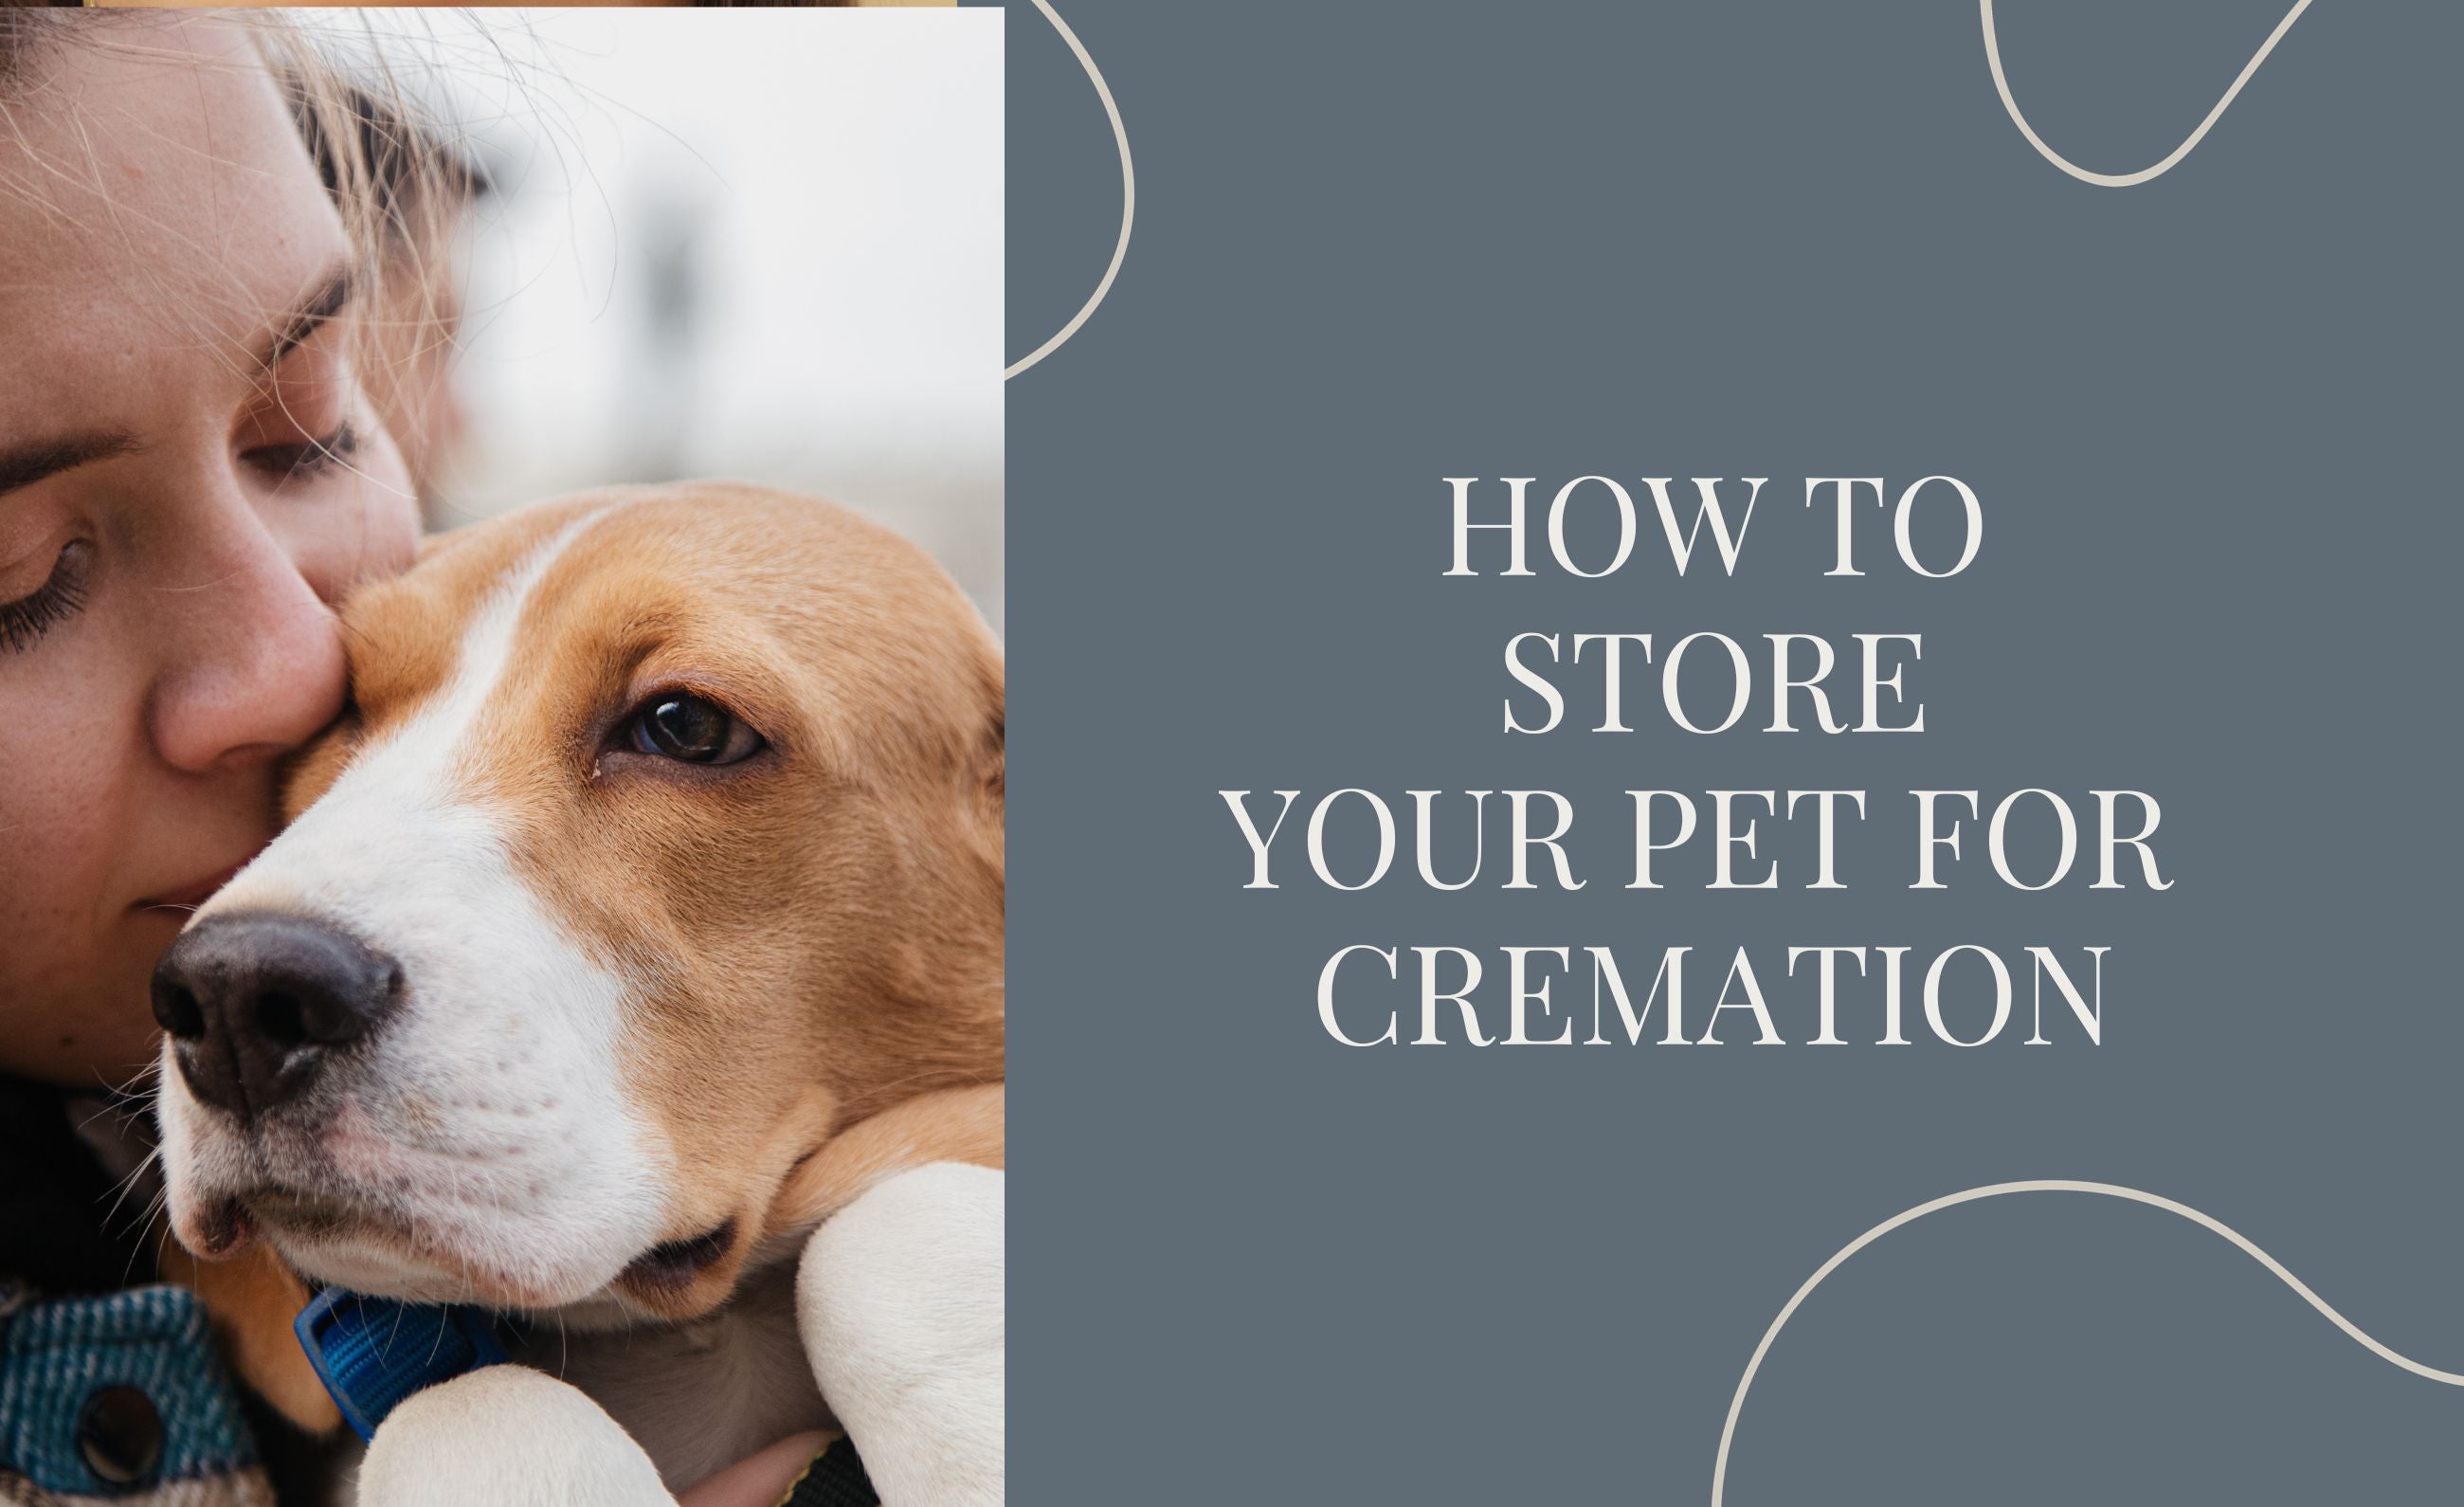 How Do I Store My Pet for Cremation?